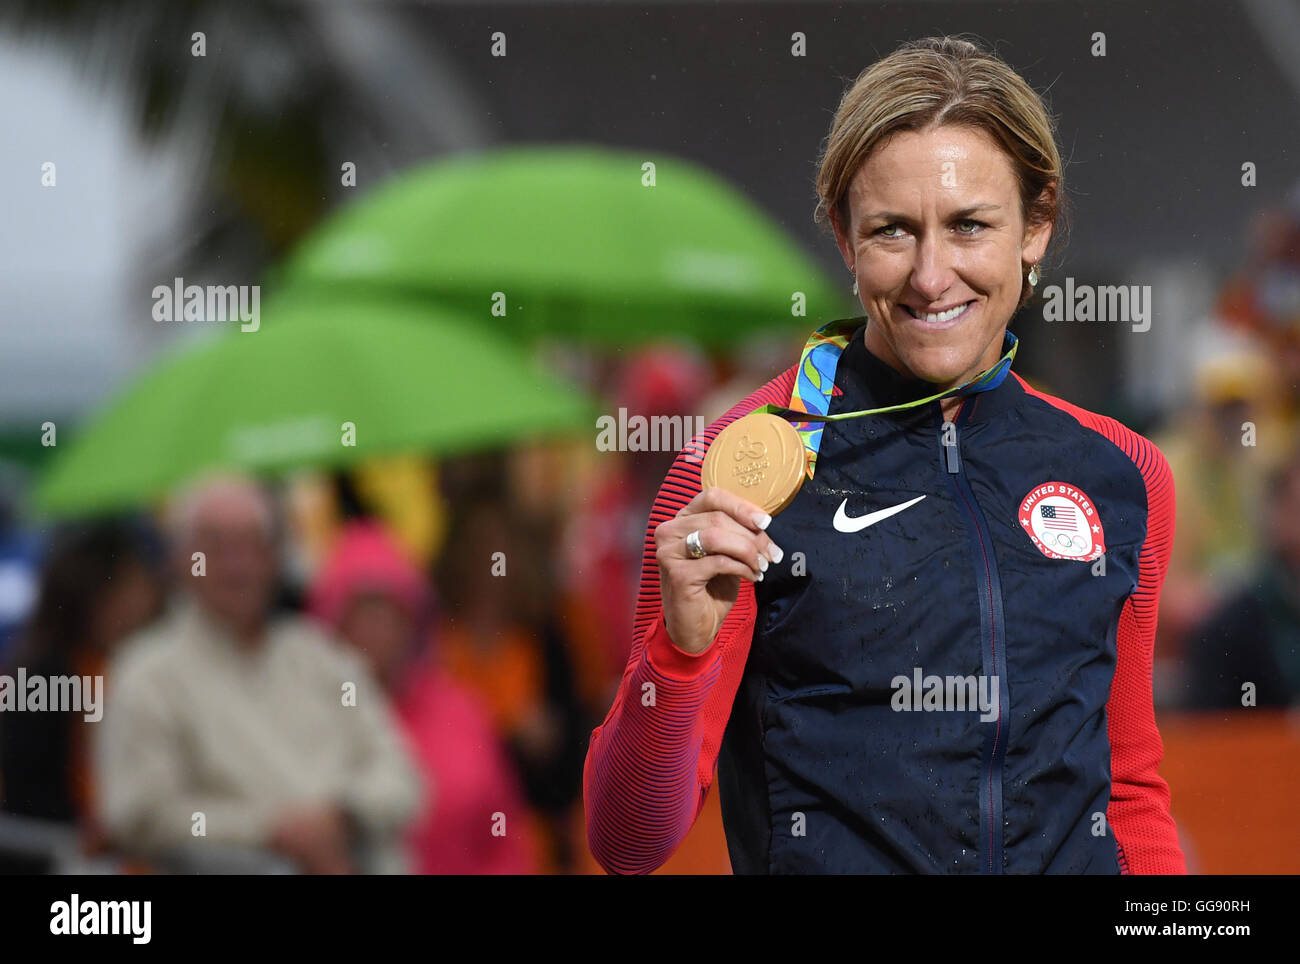 Rio de Janeiro, Brazil. 10th Aug, 2016. Kristin Armstrong of the USA celebrates on the podium with her gold medal after winning the women's Individual Time Trial of the Rio 2016 Olympic Games Road Cycling events at Pontal in Rio de Janeiro, Brazil, 10 August 2016. Photo: Sebastian Kahnert/dpa/Alamy Live News Stock Photo